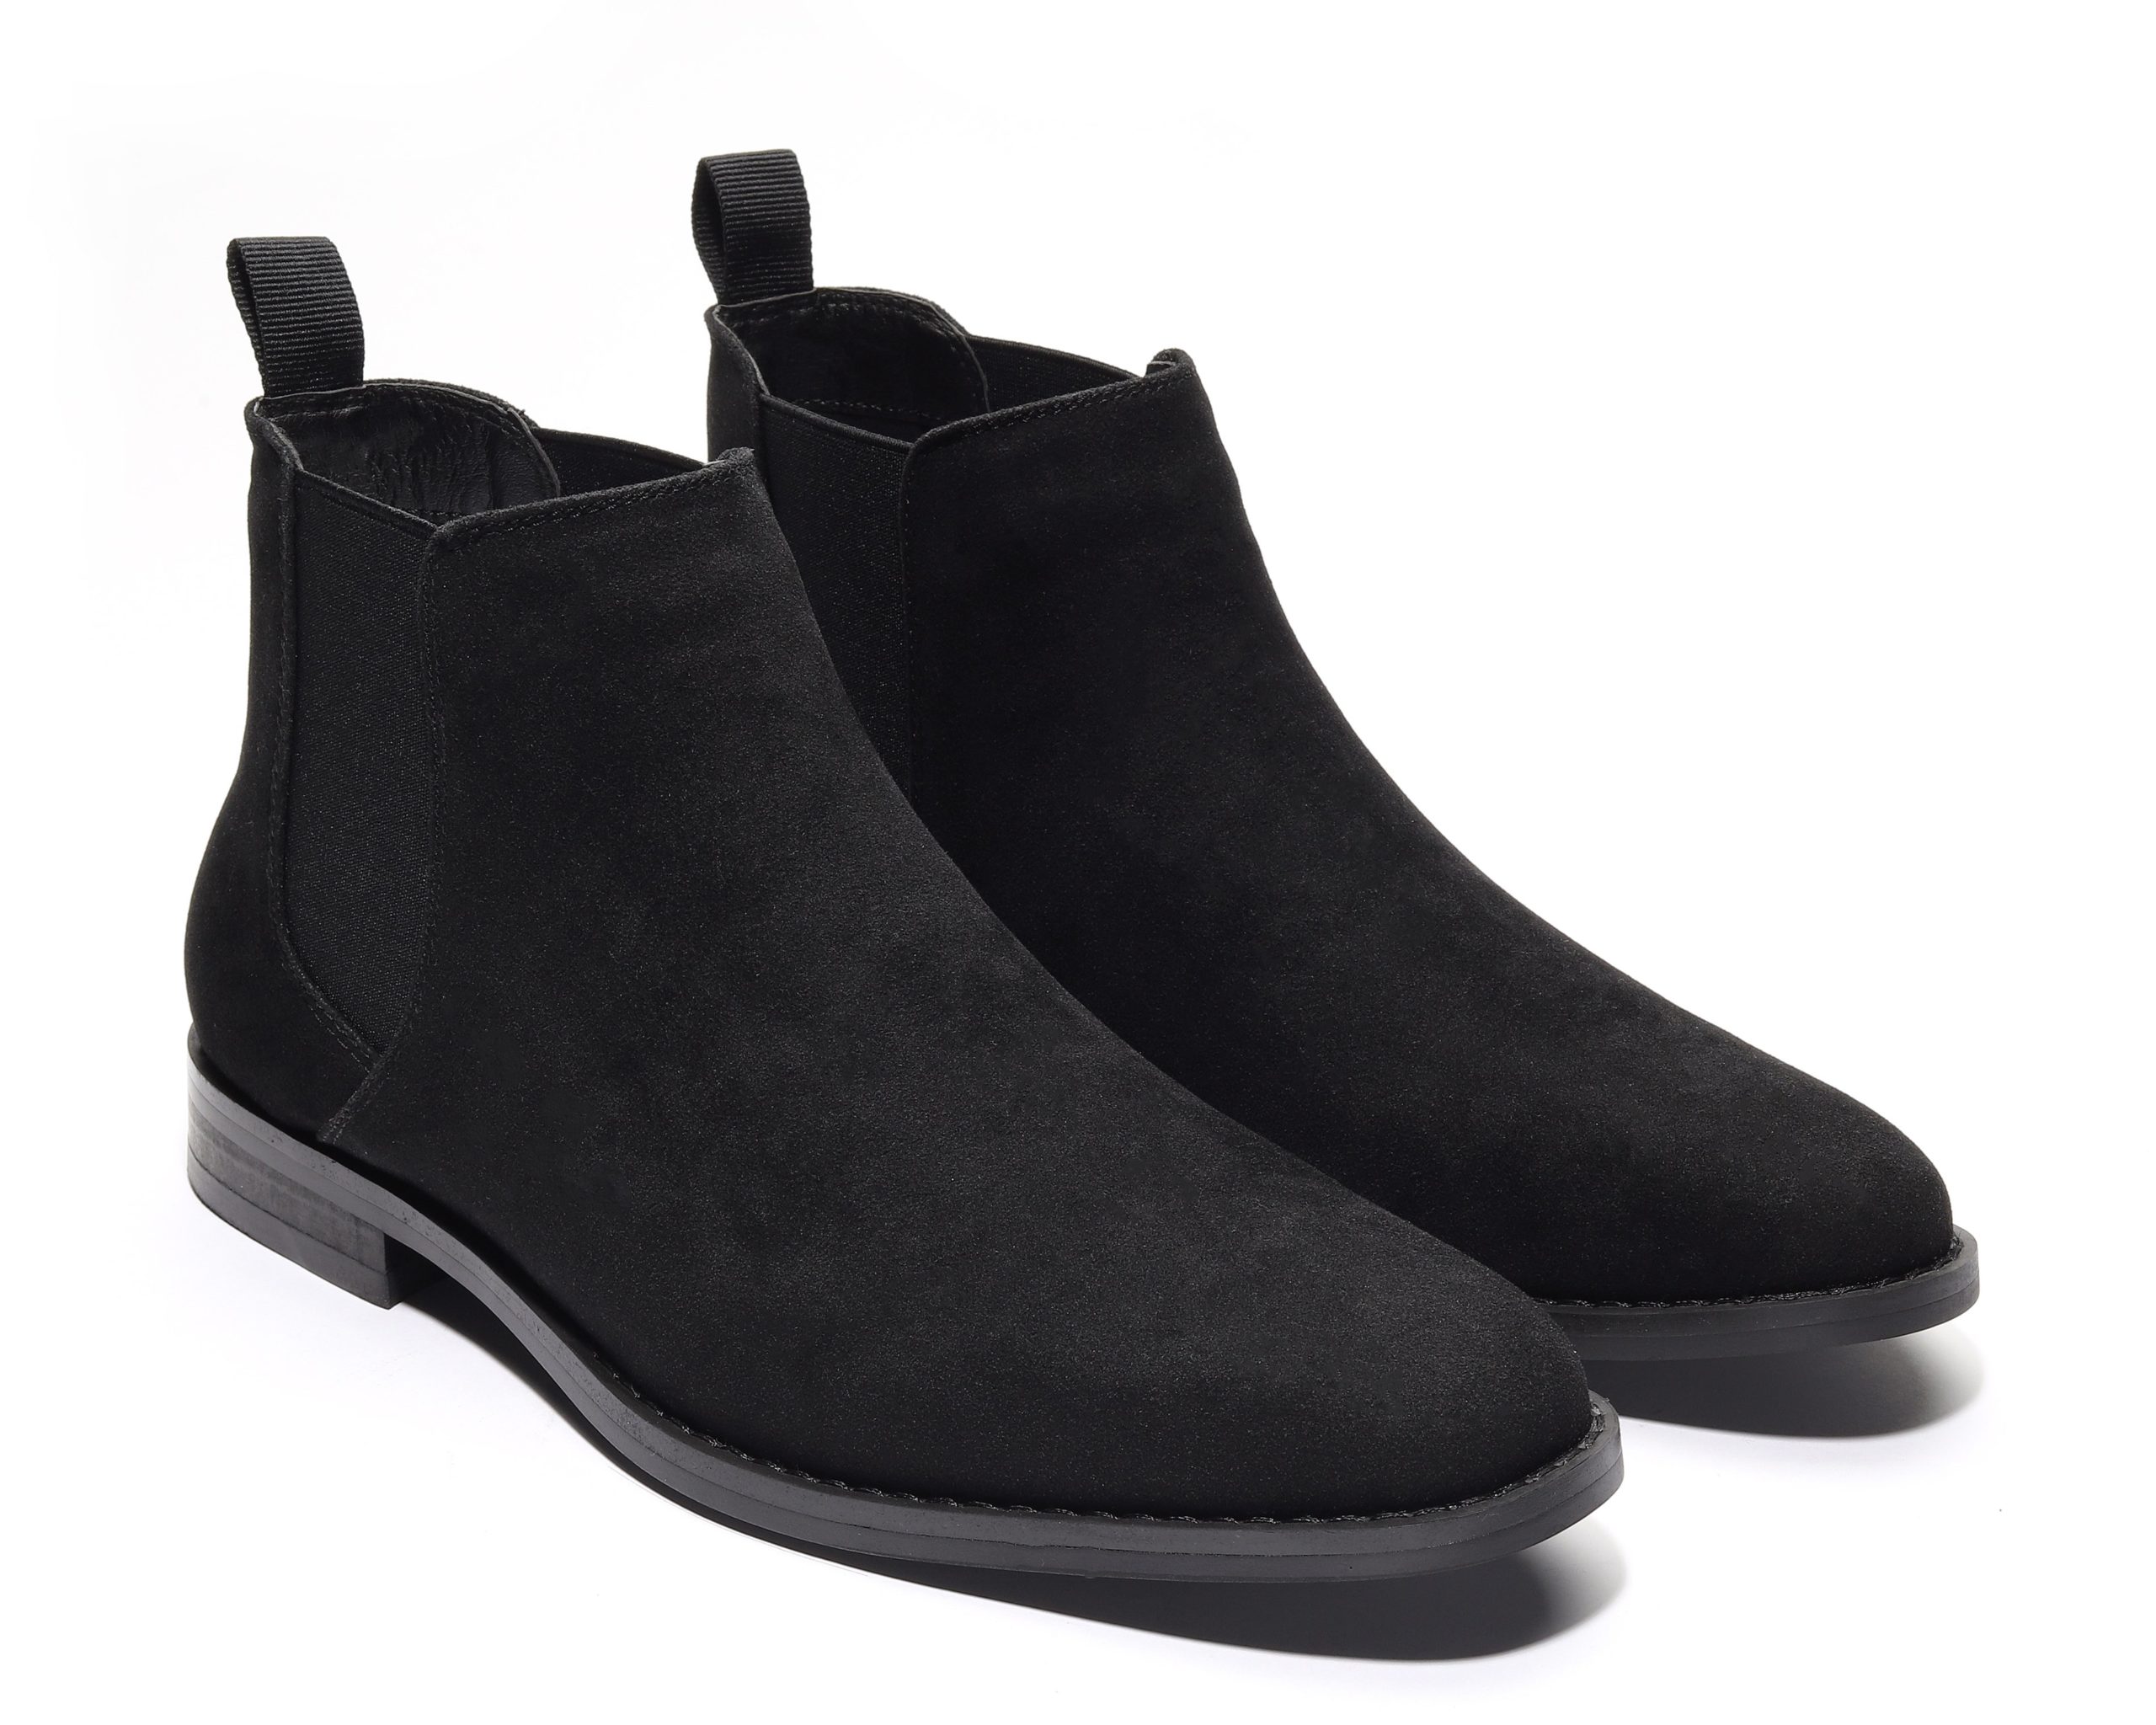 THE CLASSIC BLACK CHELSEA BOOTS ORO Los Angeles, 52% OFF